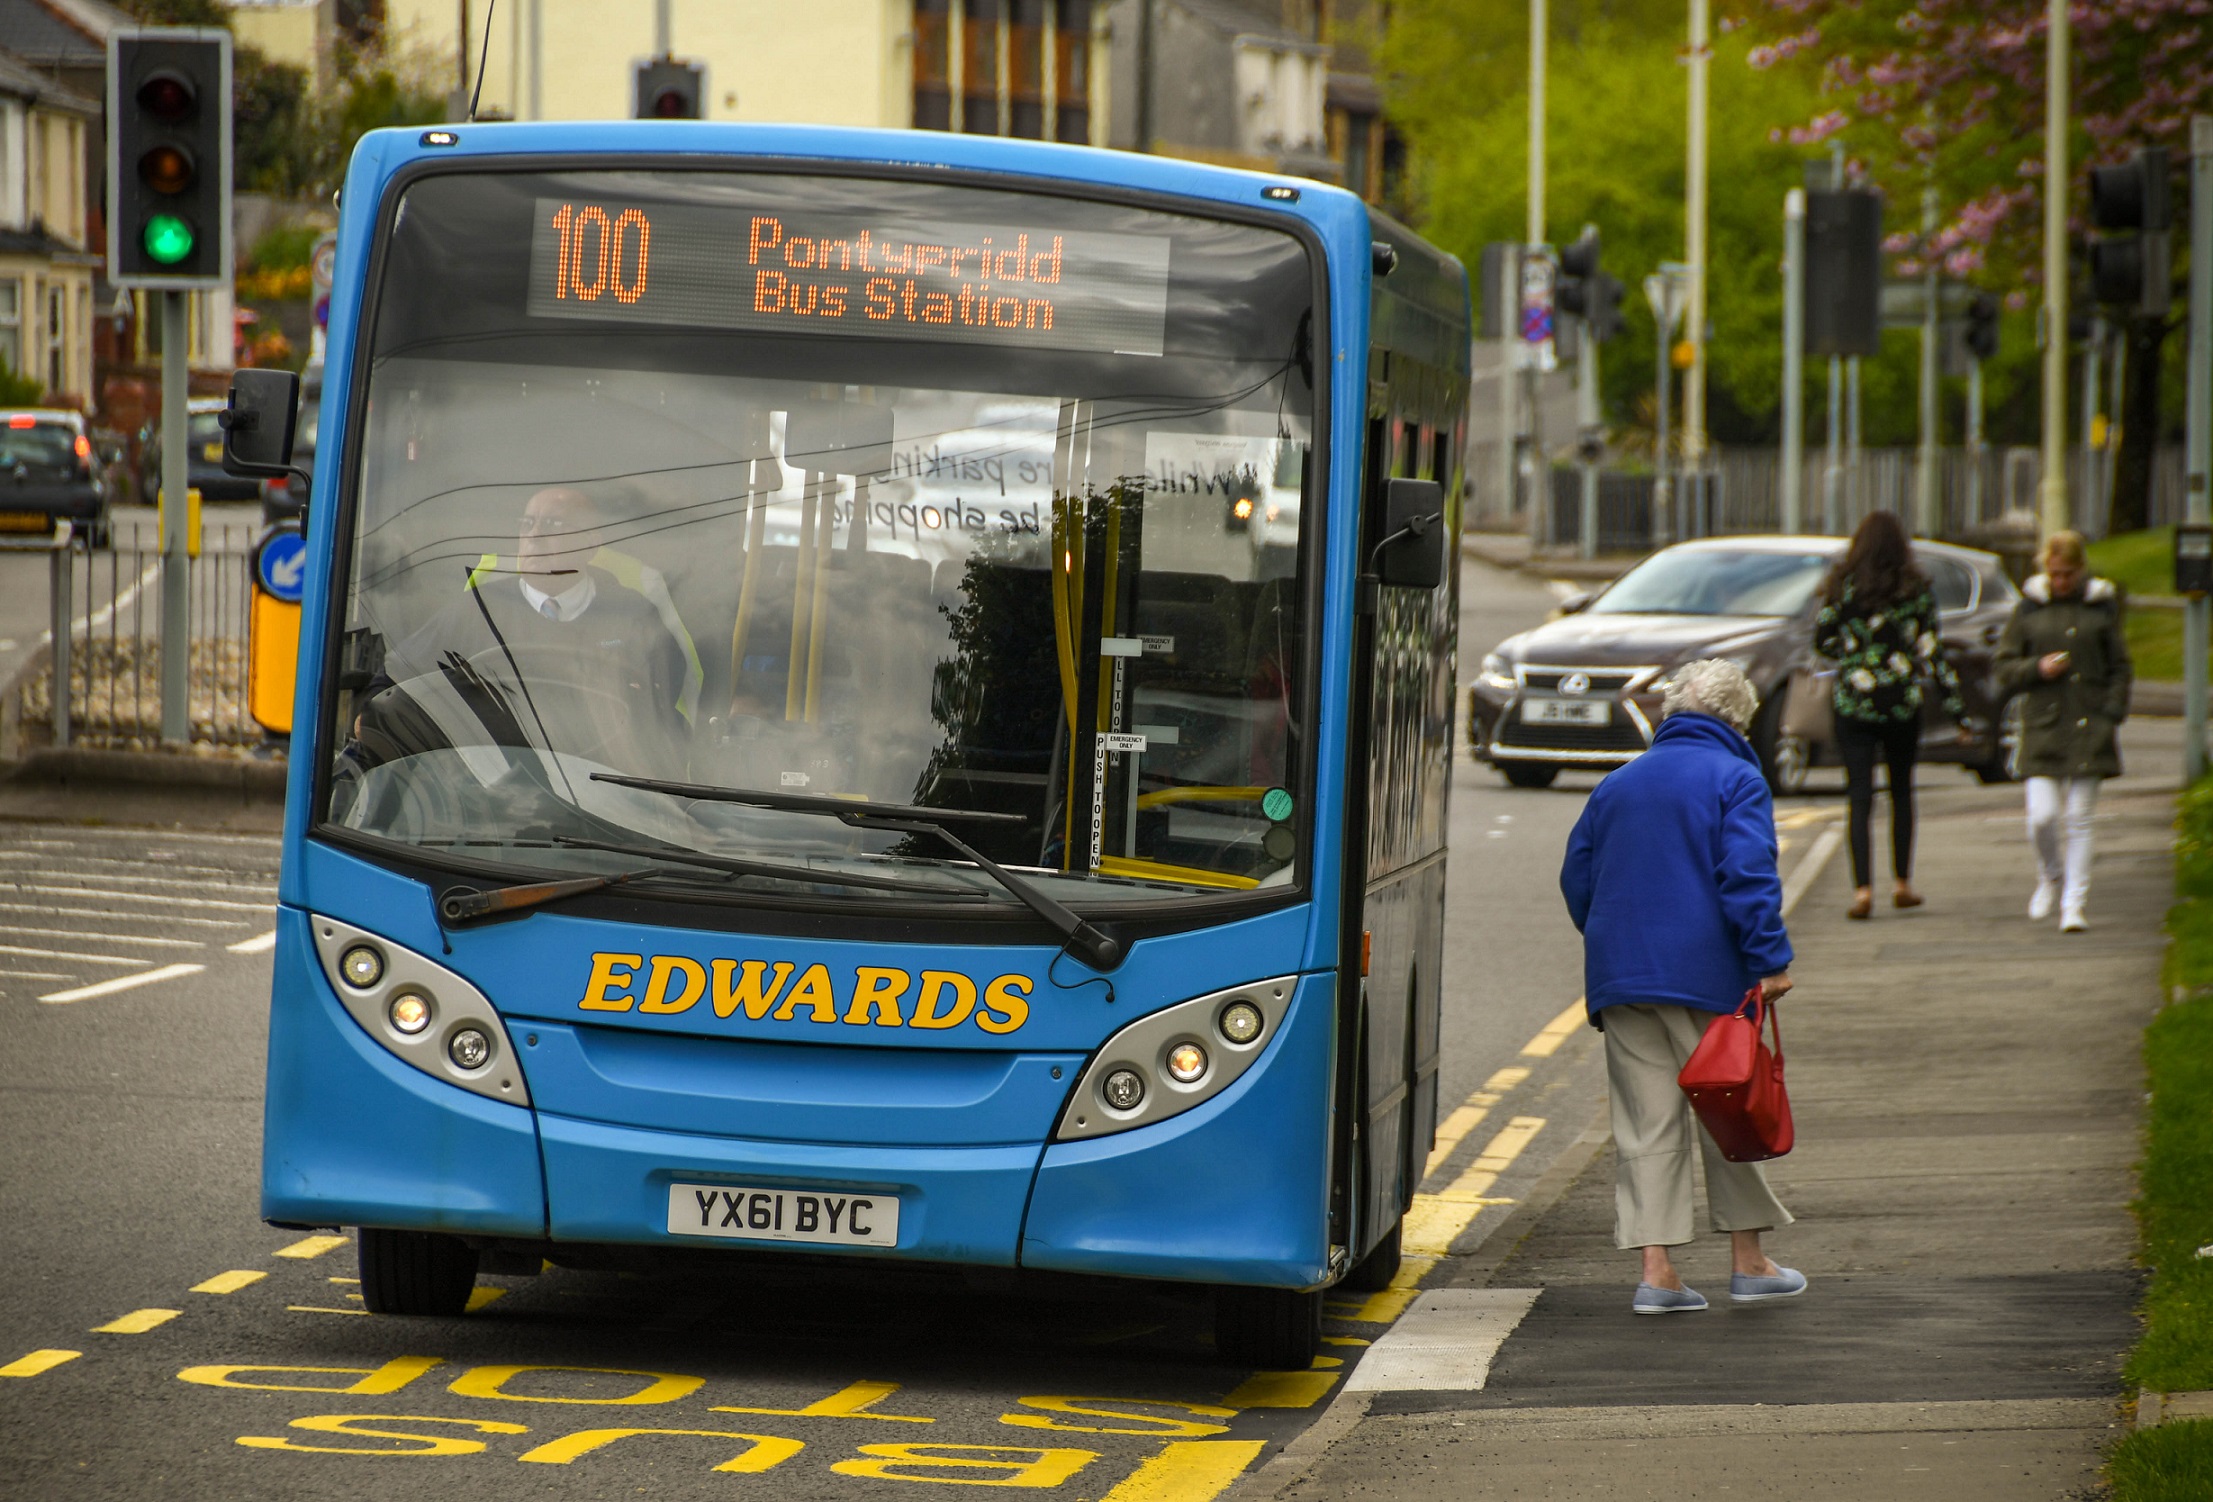 Bus funding in Wales extended to end of FY2023 by Welsh Government